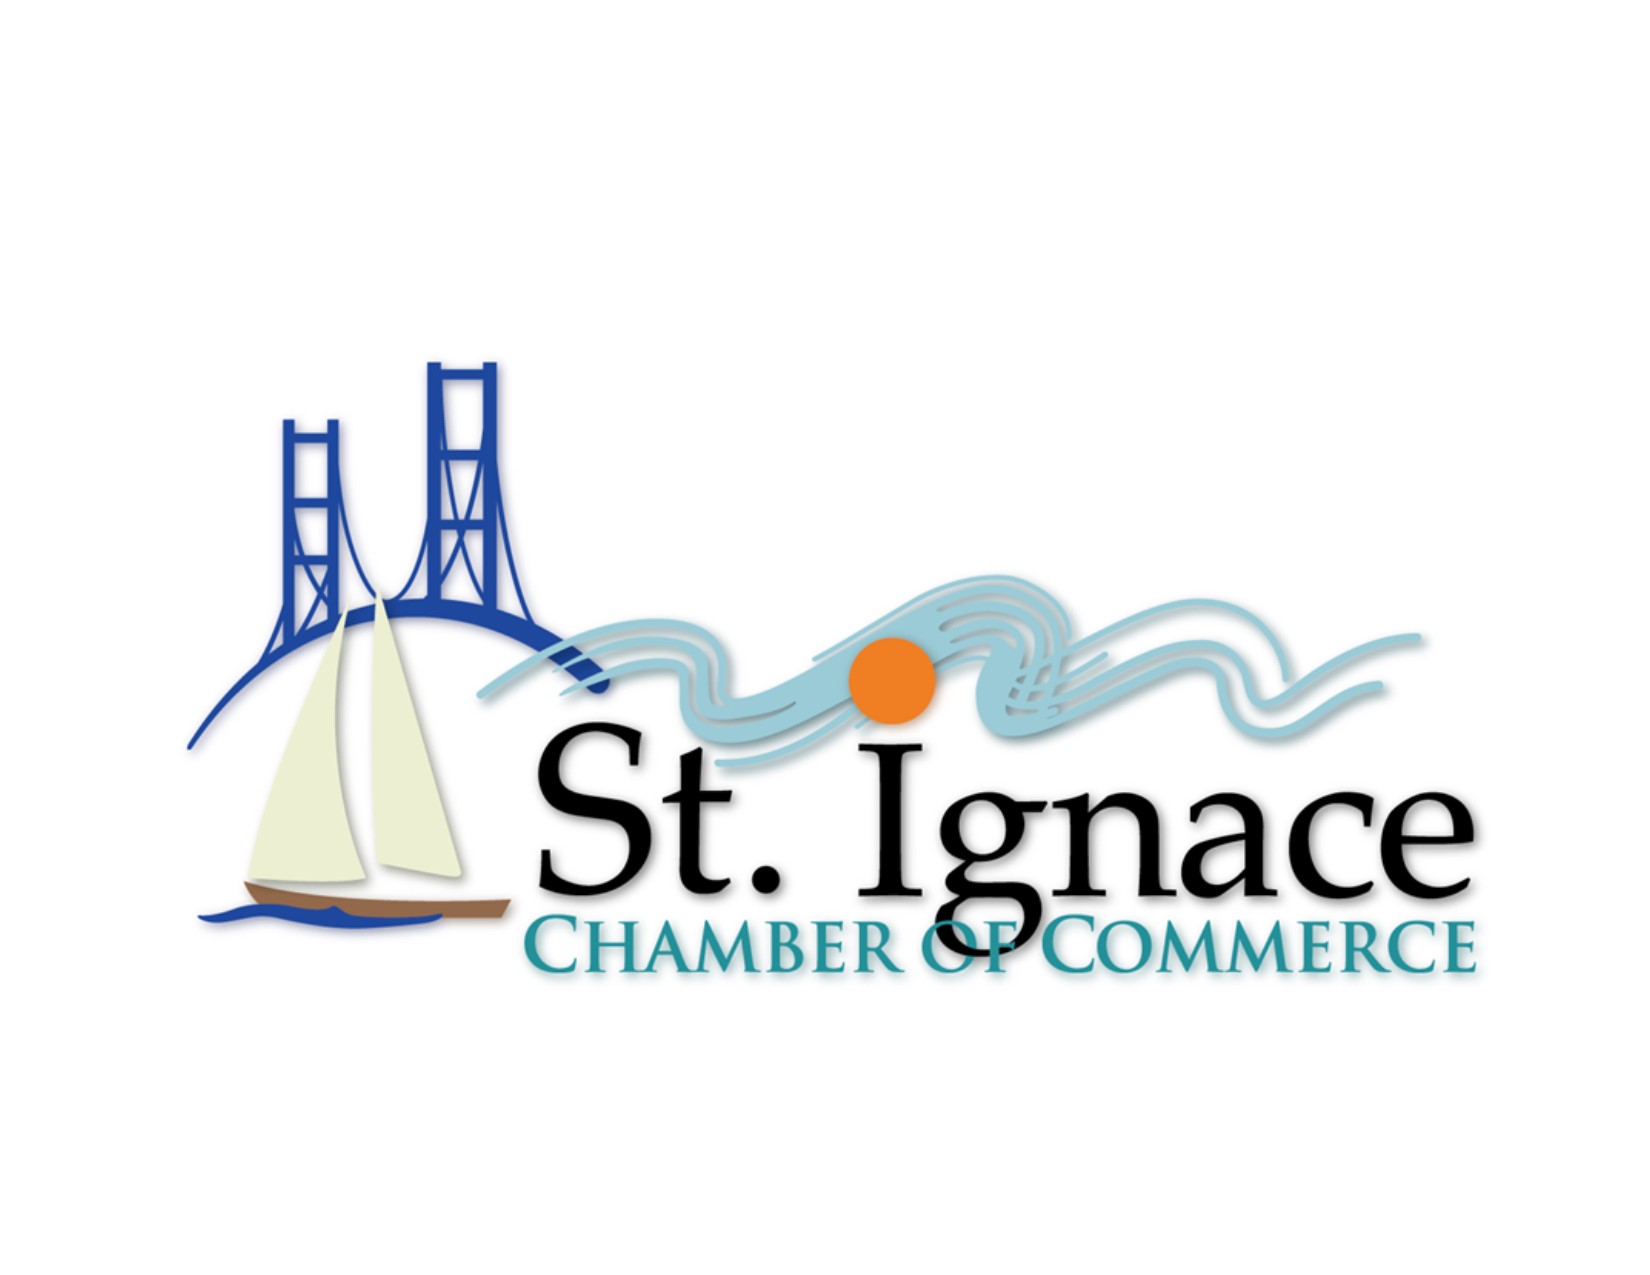 St. Ignace Chamber of Commerce Board Meeting @ St. Ignace Chamber of Commerce conference room